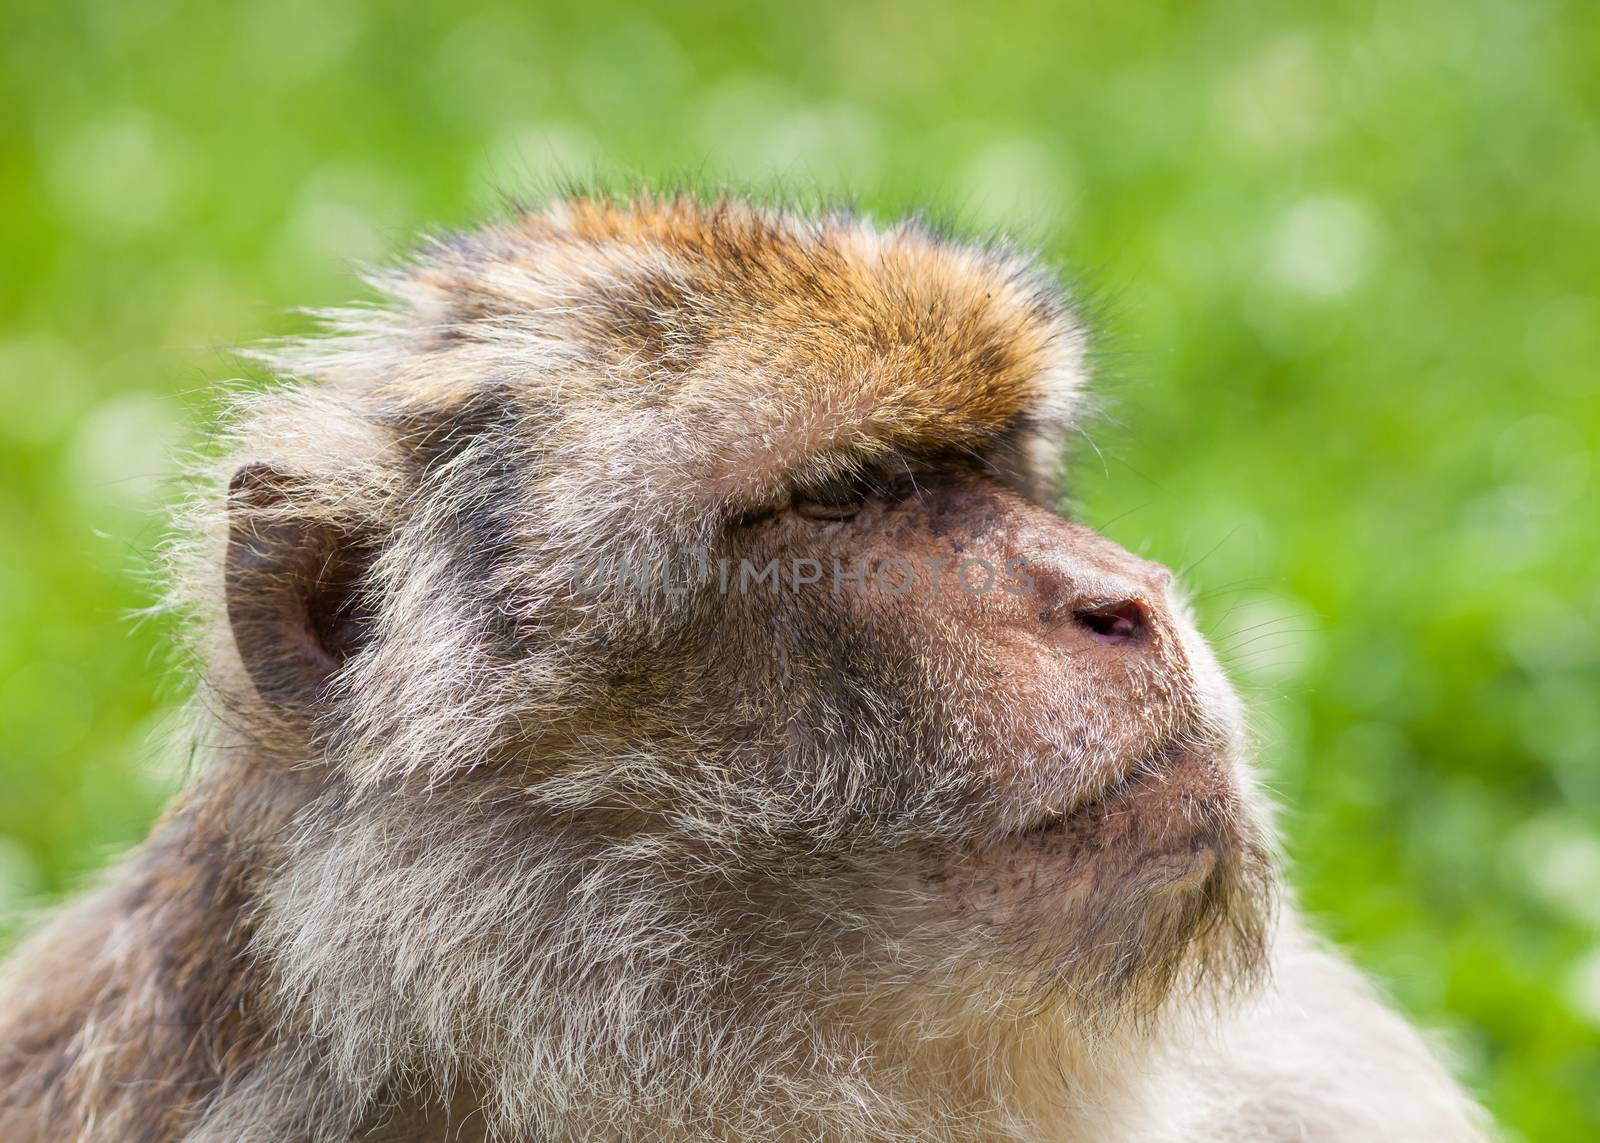 A close up picture of a Barbary macaque monkey.  The monkeys live in the Atlas Mountains of Algeria and Morocco.